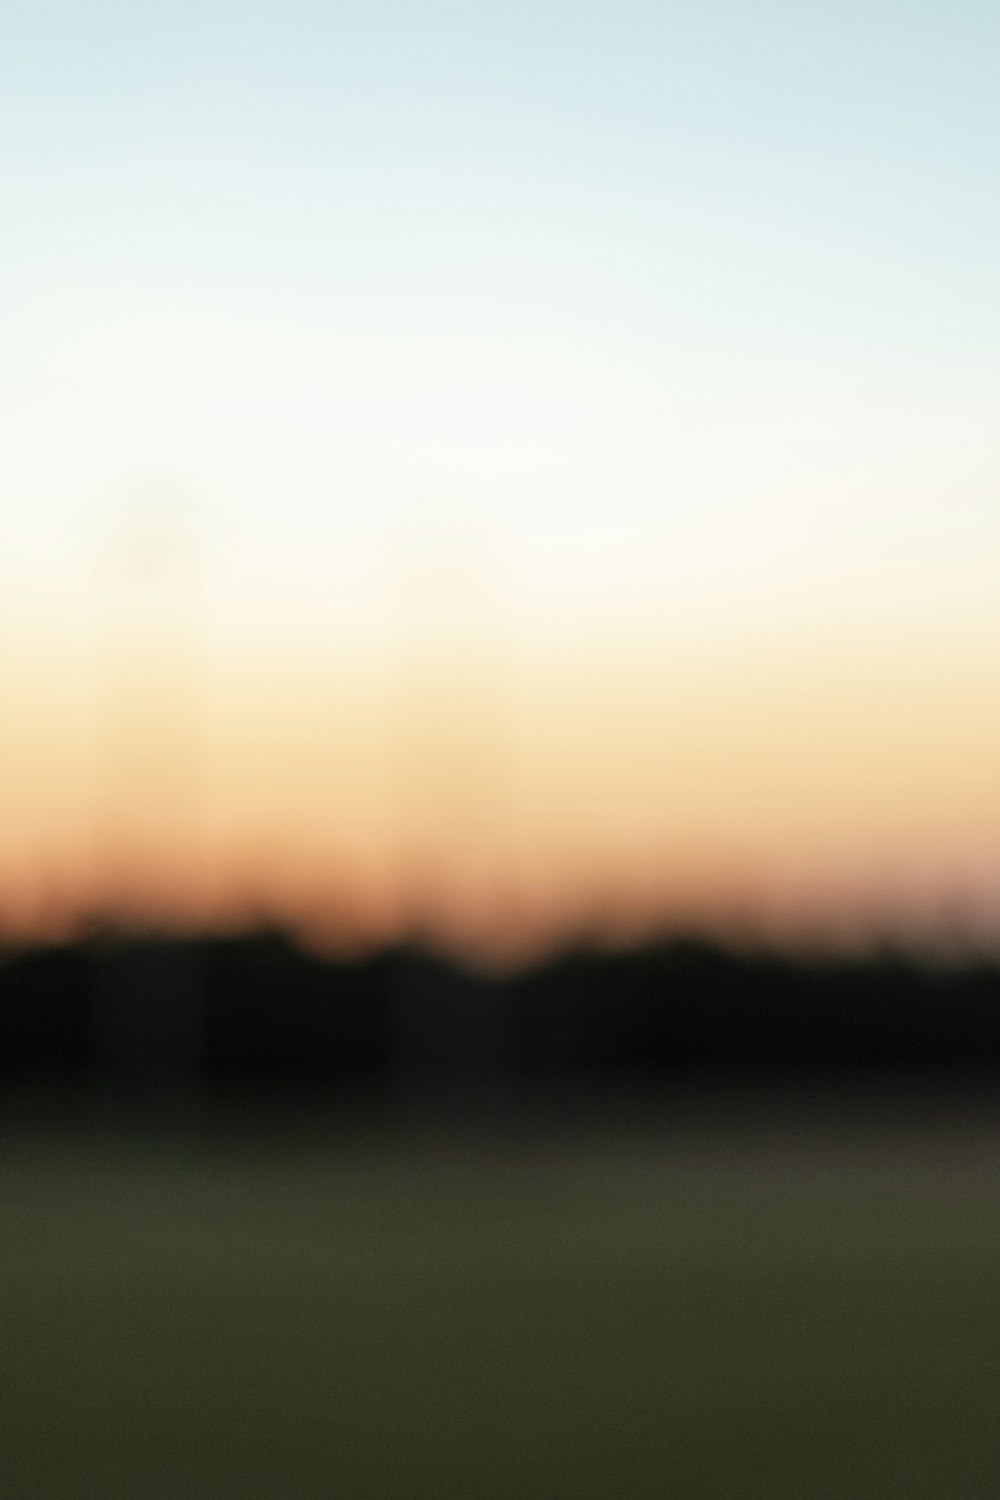 Blurred Background Pictures | Download Free Images on Unsplash